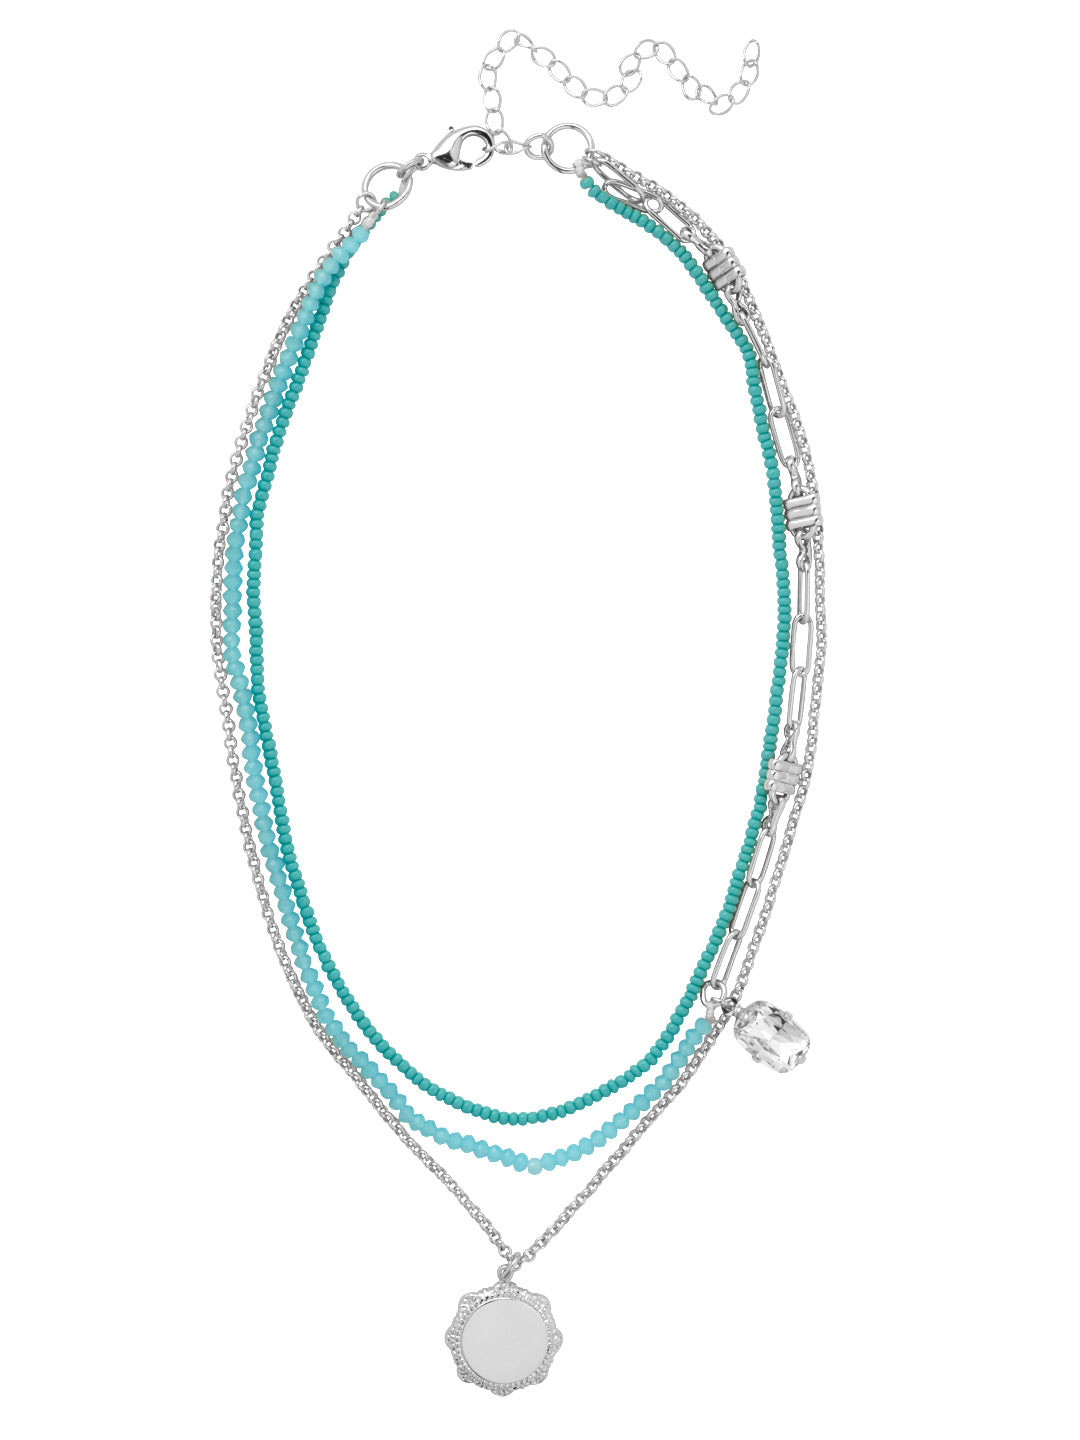 Pura Layered Necklace - 4NFJ7PDTQ - <p>The Pura Layered Necklace features beaded layers, a crystal accent, and a metal disk pendant dangling from a chain, secured by a lobster claw clasp. From Sorrelli's Turquoise collection in our Palladium finish.</p>